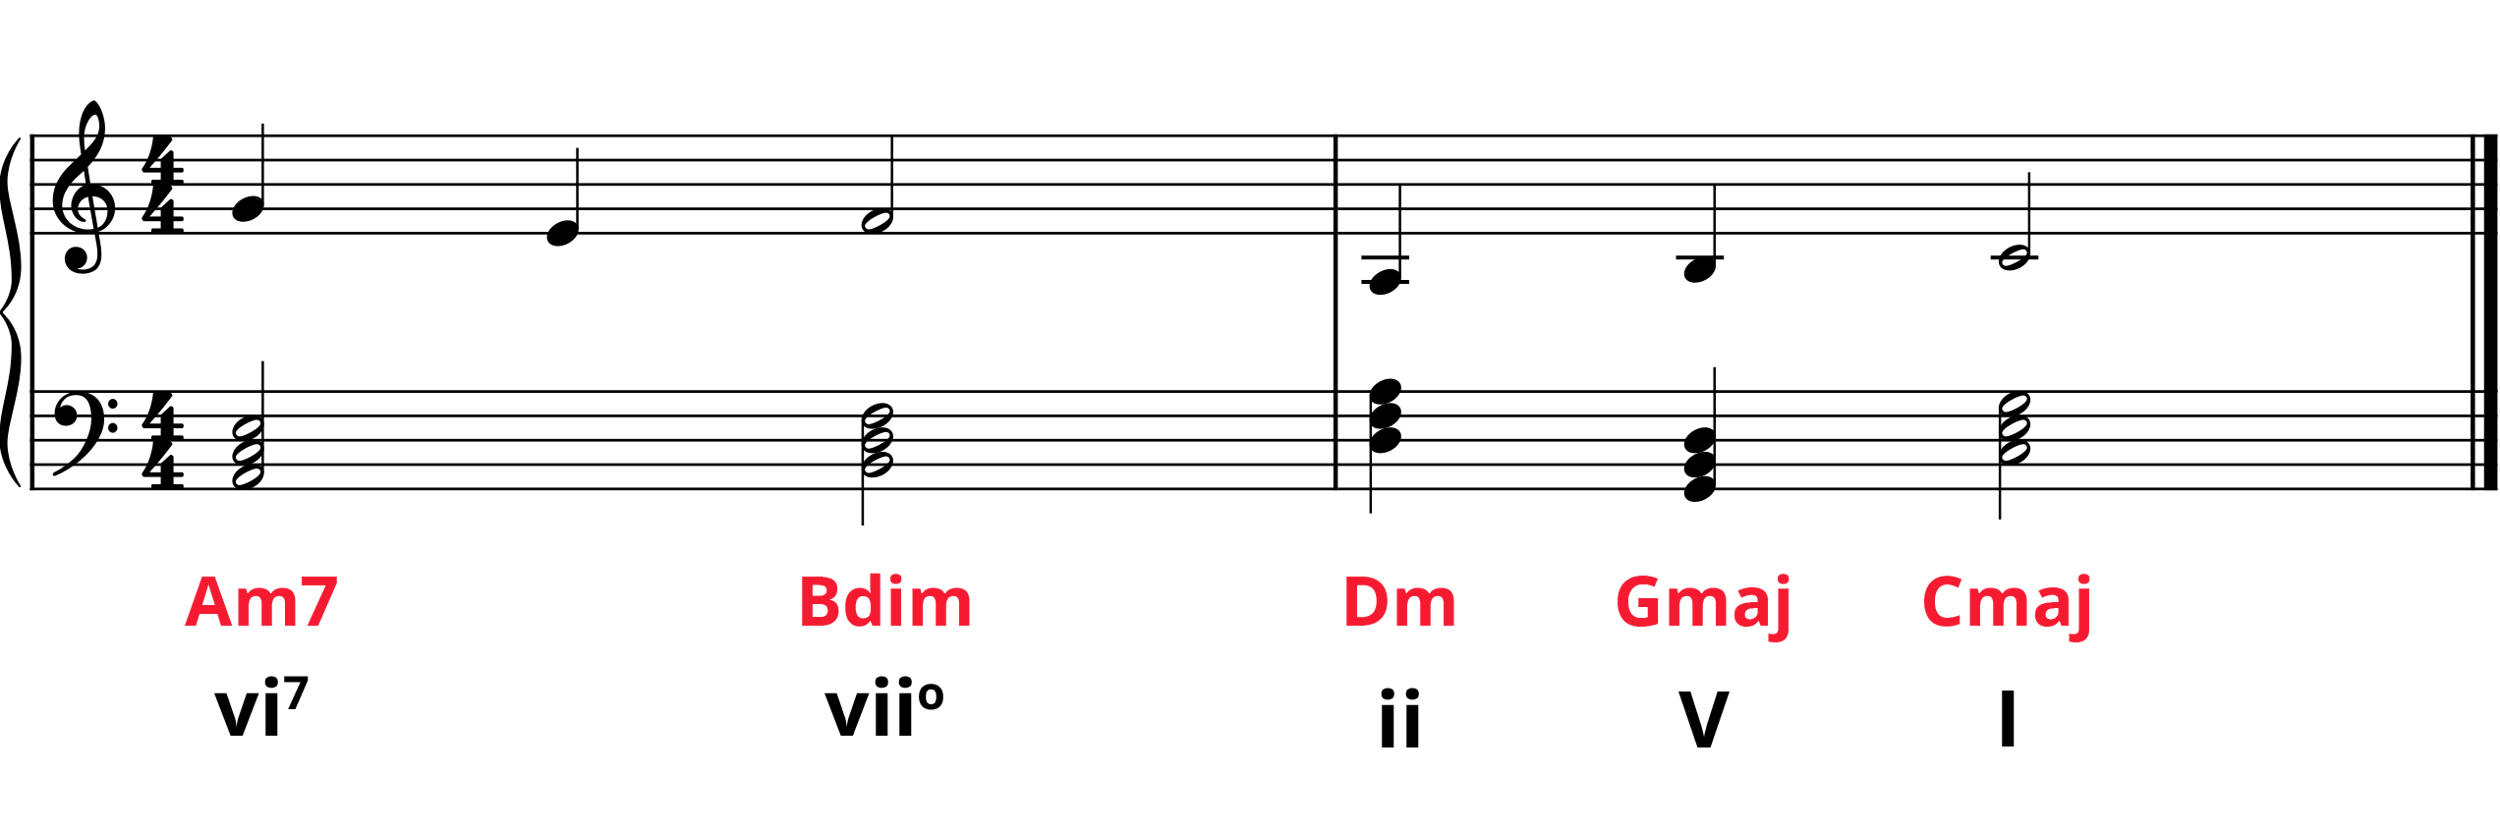 Melody in standard notation with reharmed chords: Am7-Bdim-Dm-G-C.